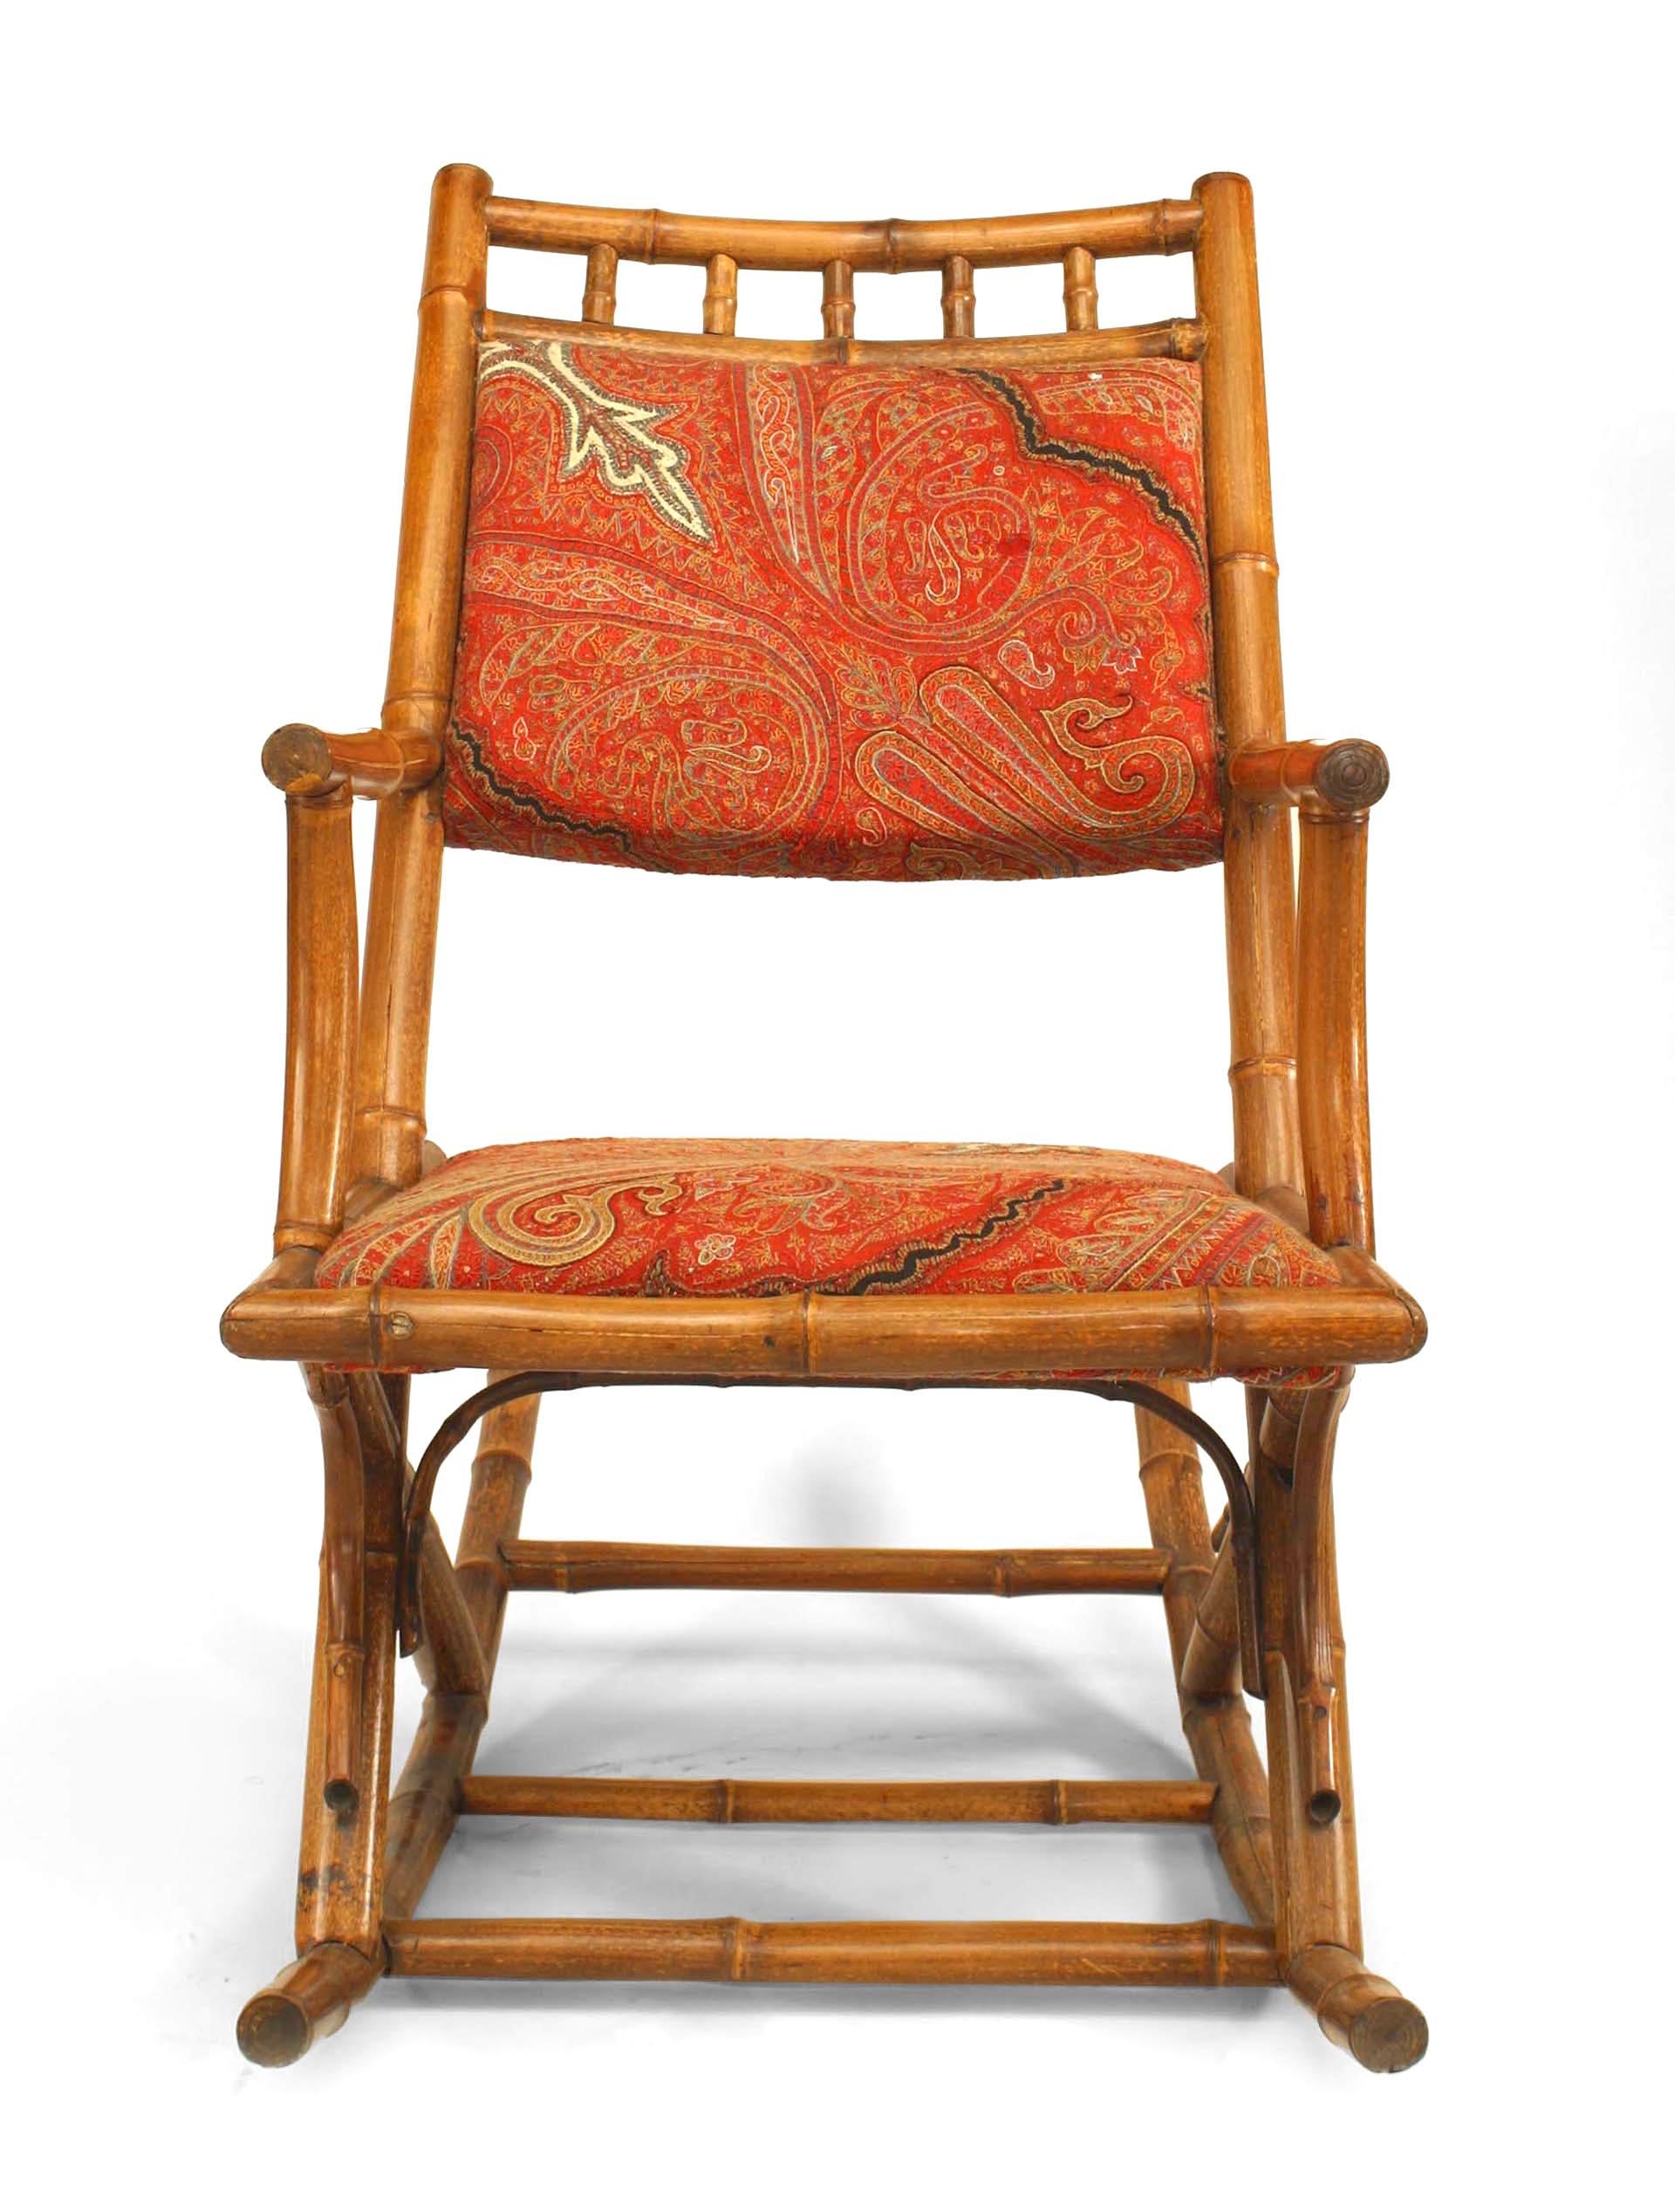 French Victorian bamboo rocking chair with paisley upholstered seat and back
